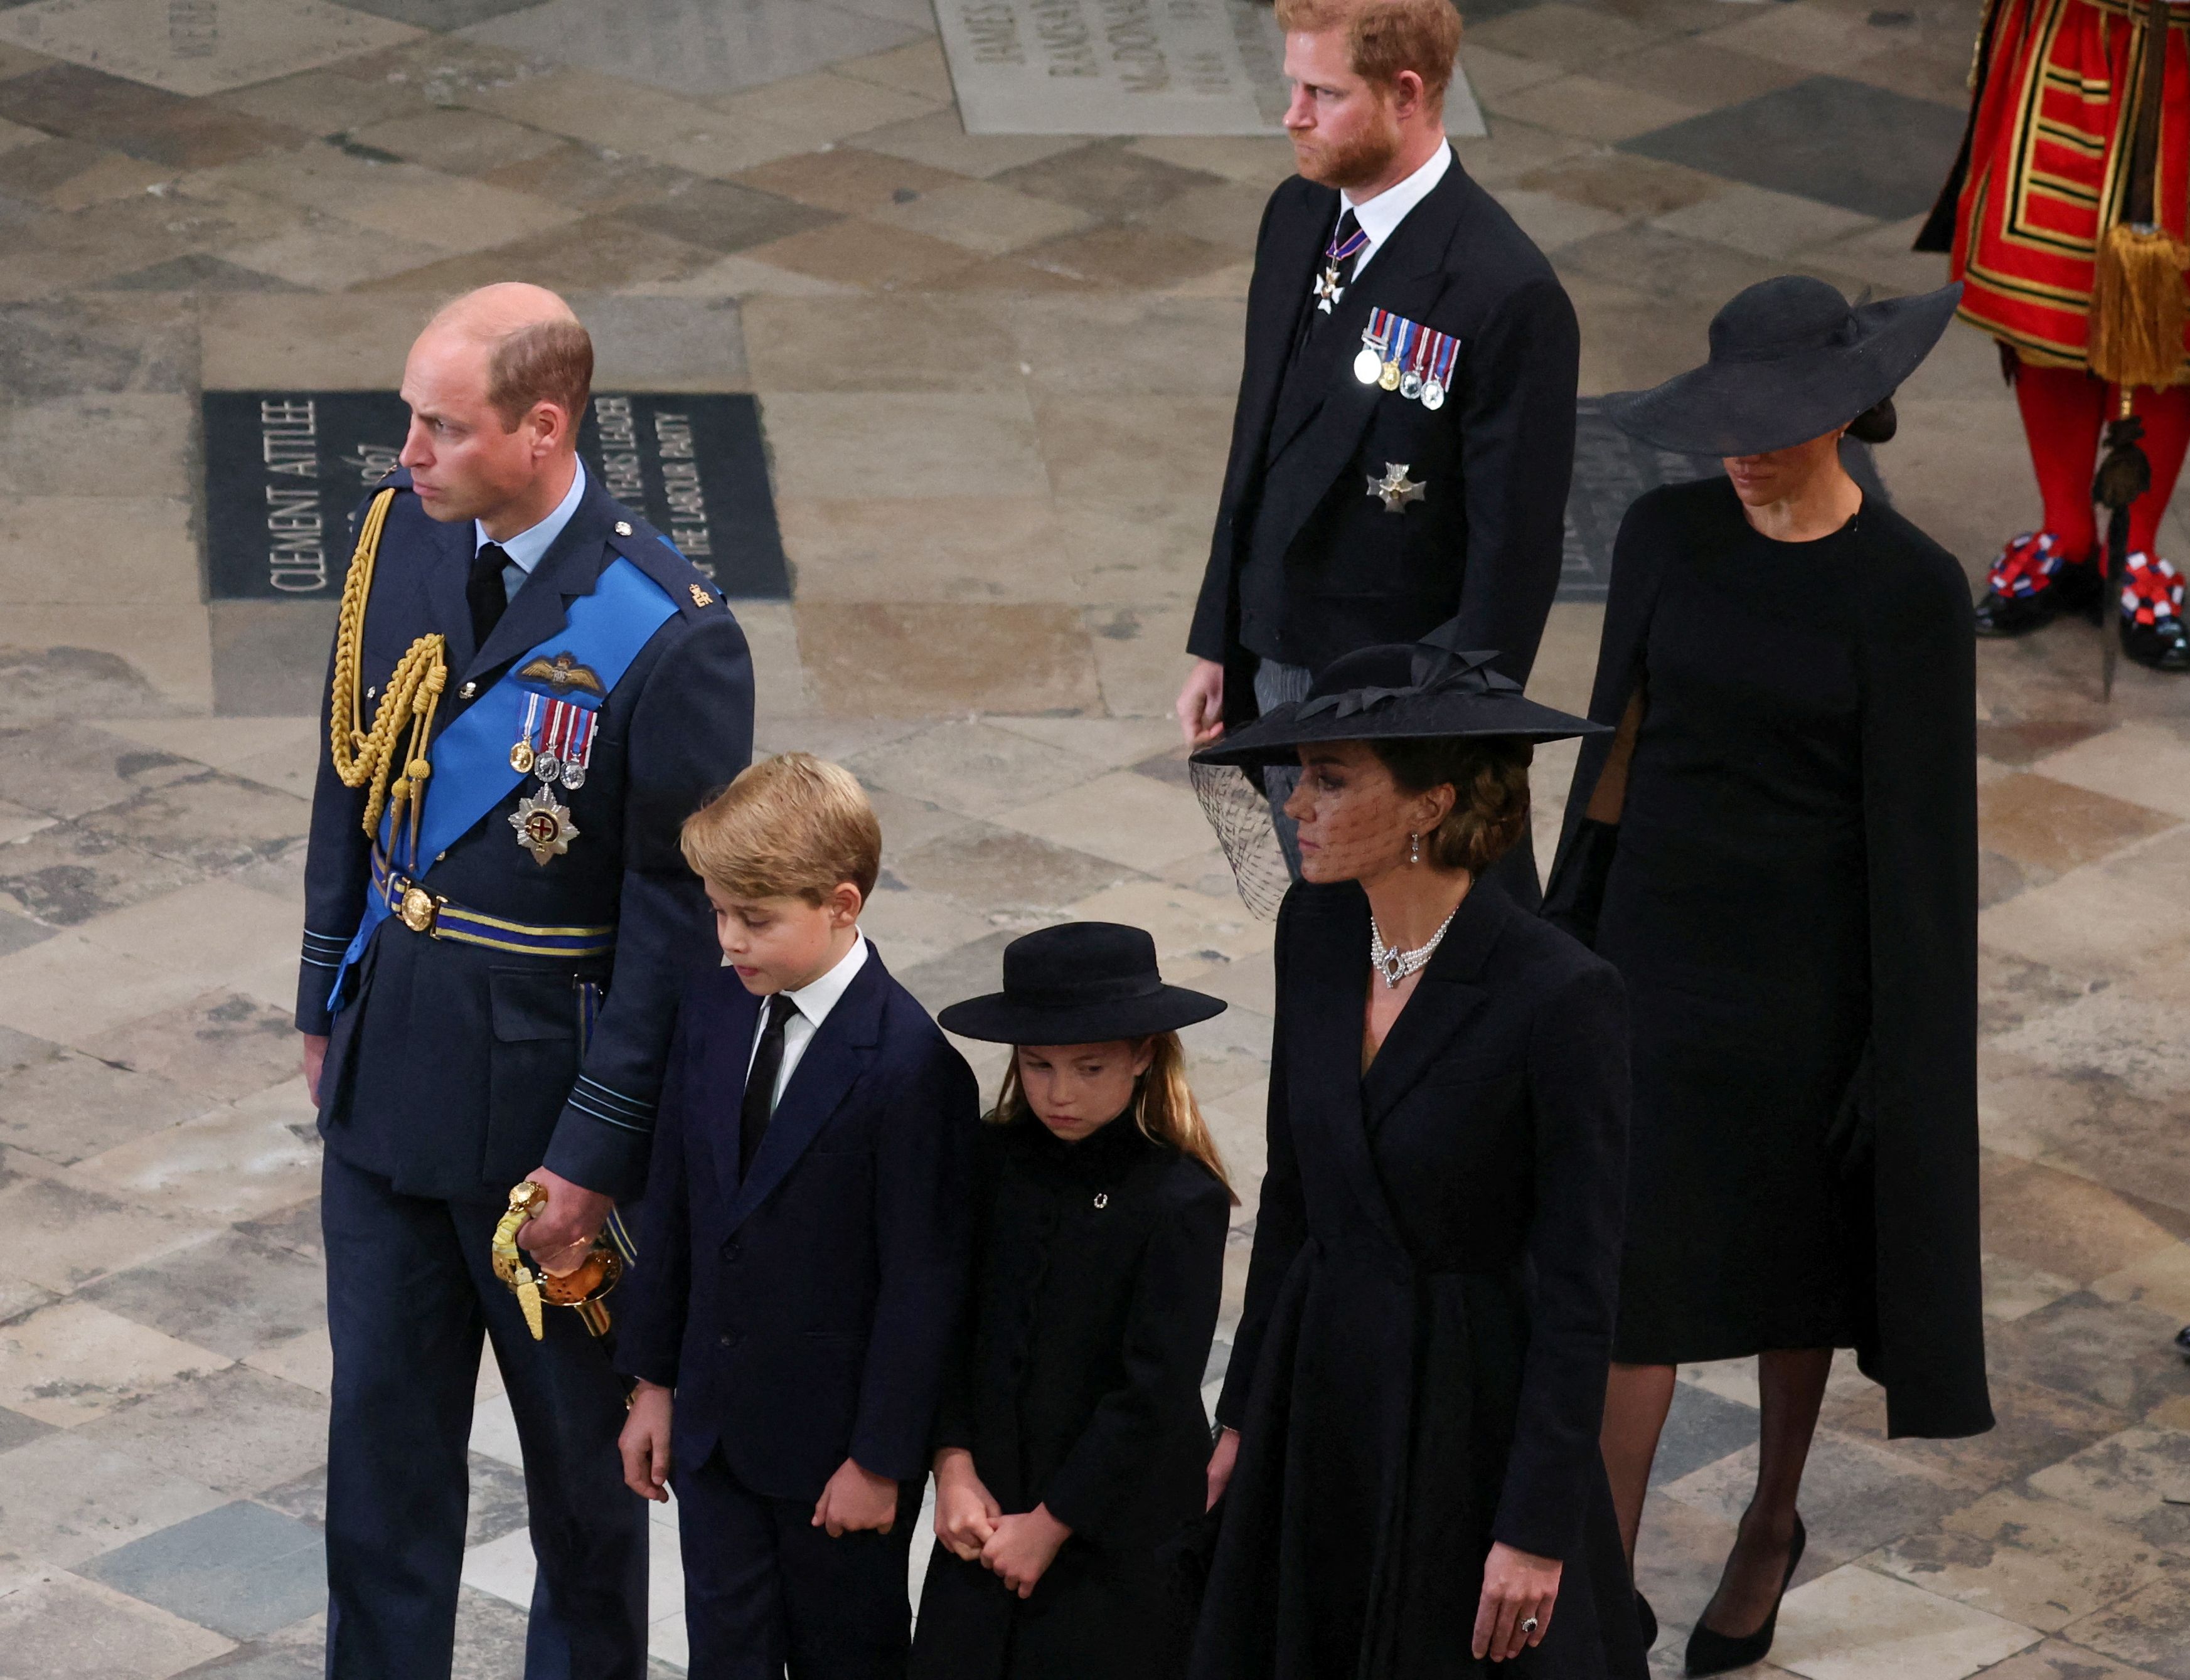 William, Prince of Wales, Prince George of Wales, Princess Charlotte of Wales, Catherine, Princess of Wales, Prince Harry, Duke of Sussex, and Meghan, Duchess of Sussex attend the state funeral and burial of Britain's Queen Elizabeth at Westminster Abbey in London, Britain, on September 19, 2022. | Source: Getty Images